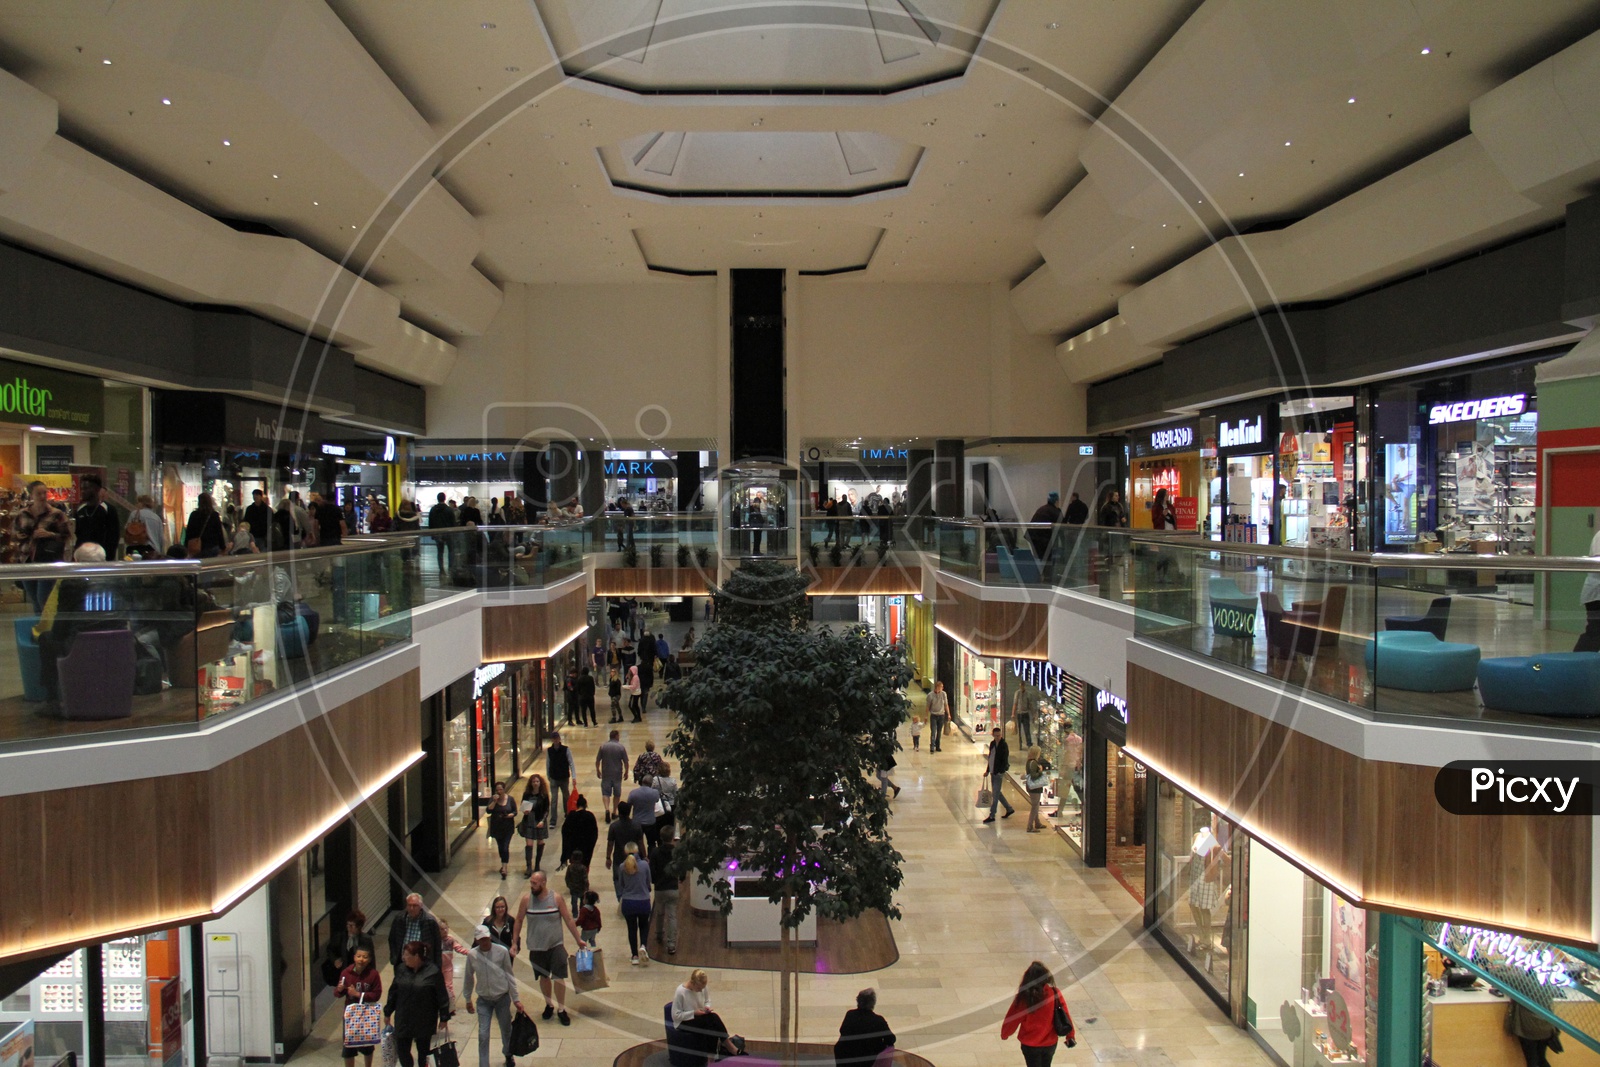 London Shopping Mall with Crowd inside